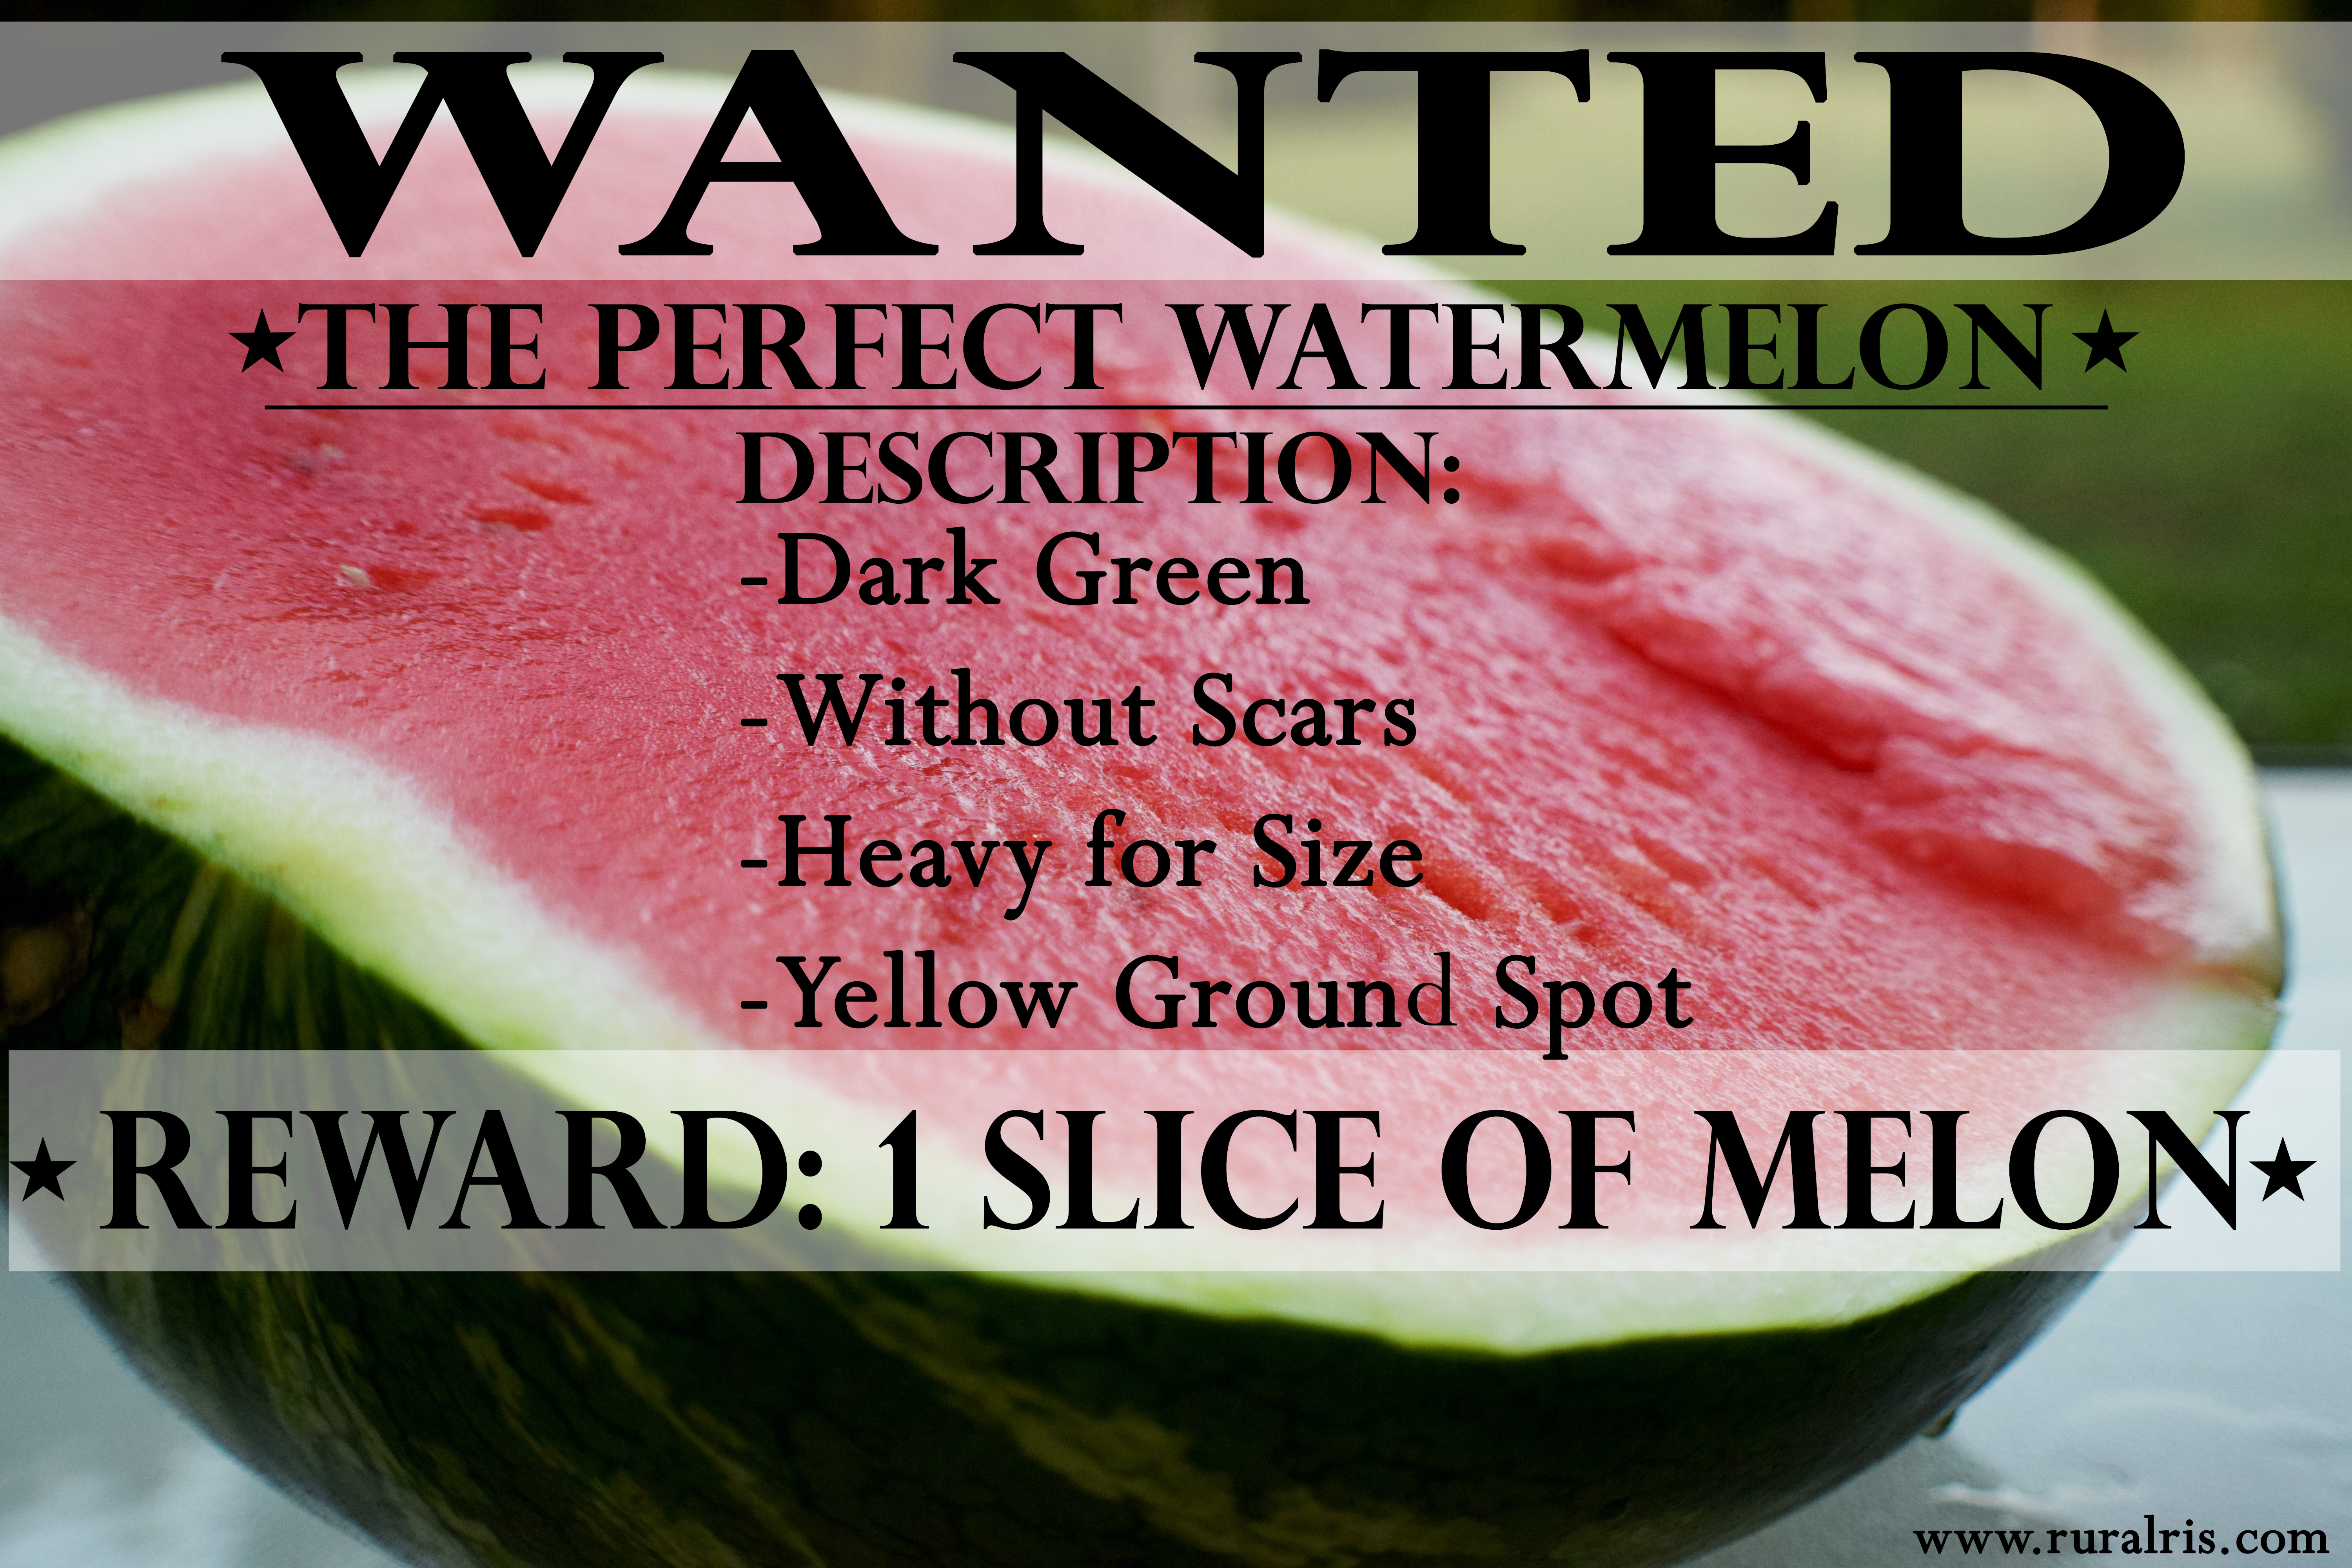 How can you tell if a watermelon is bad?